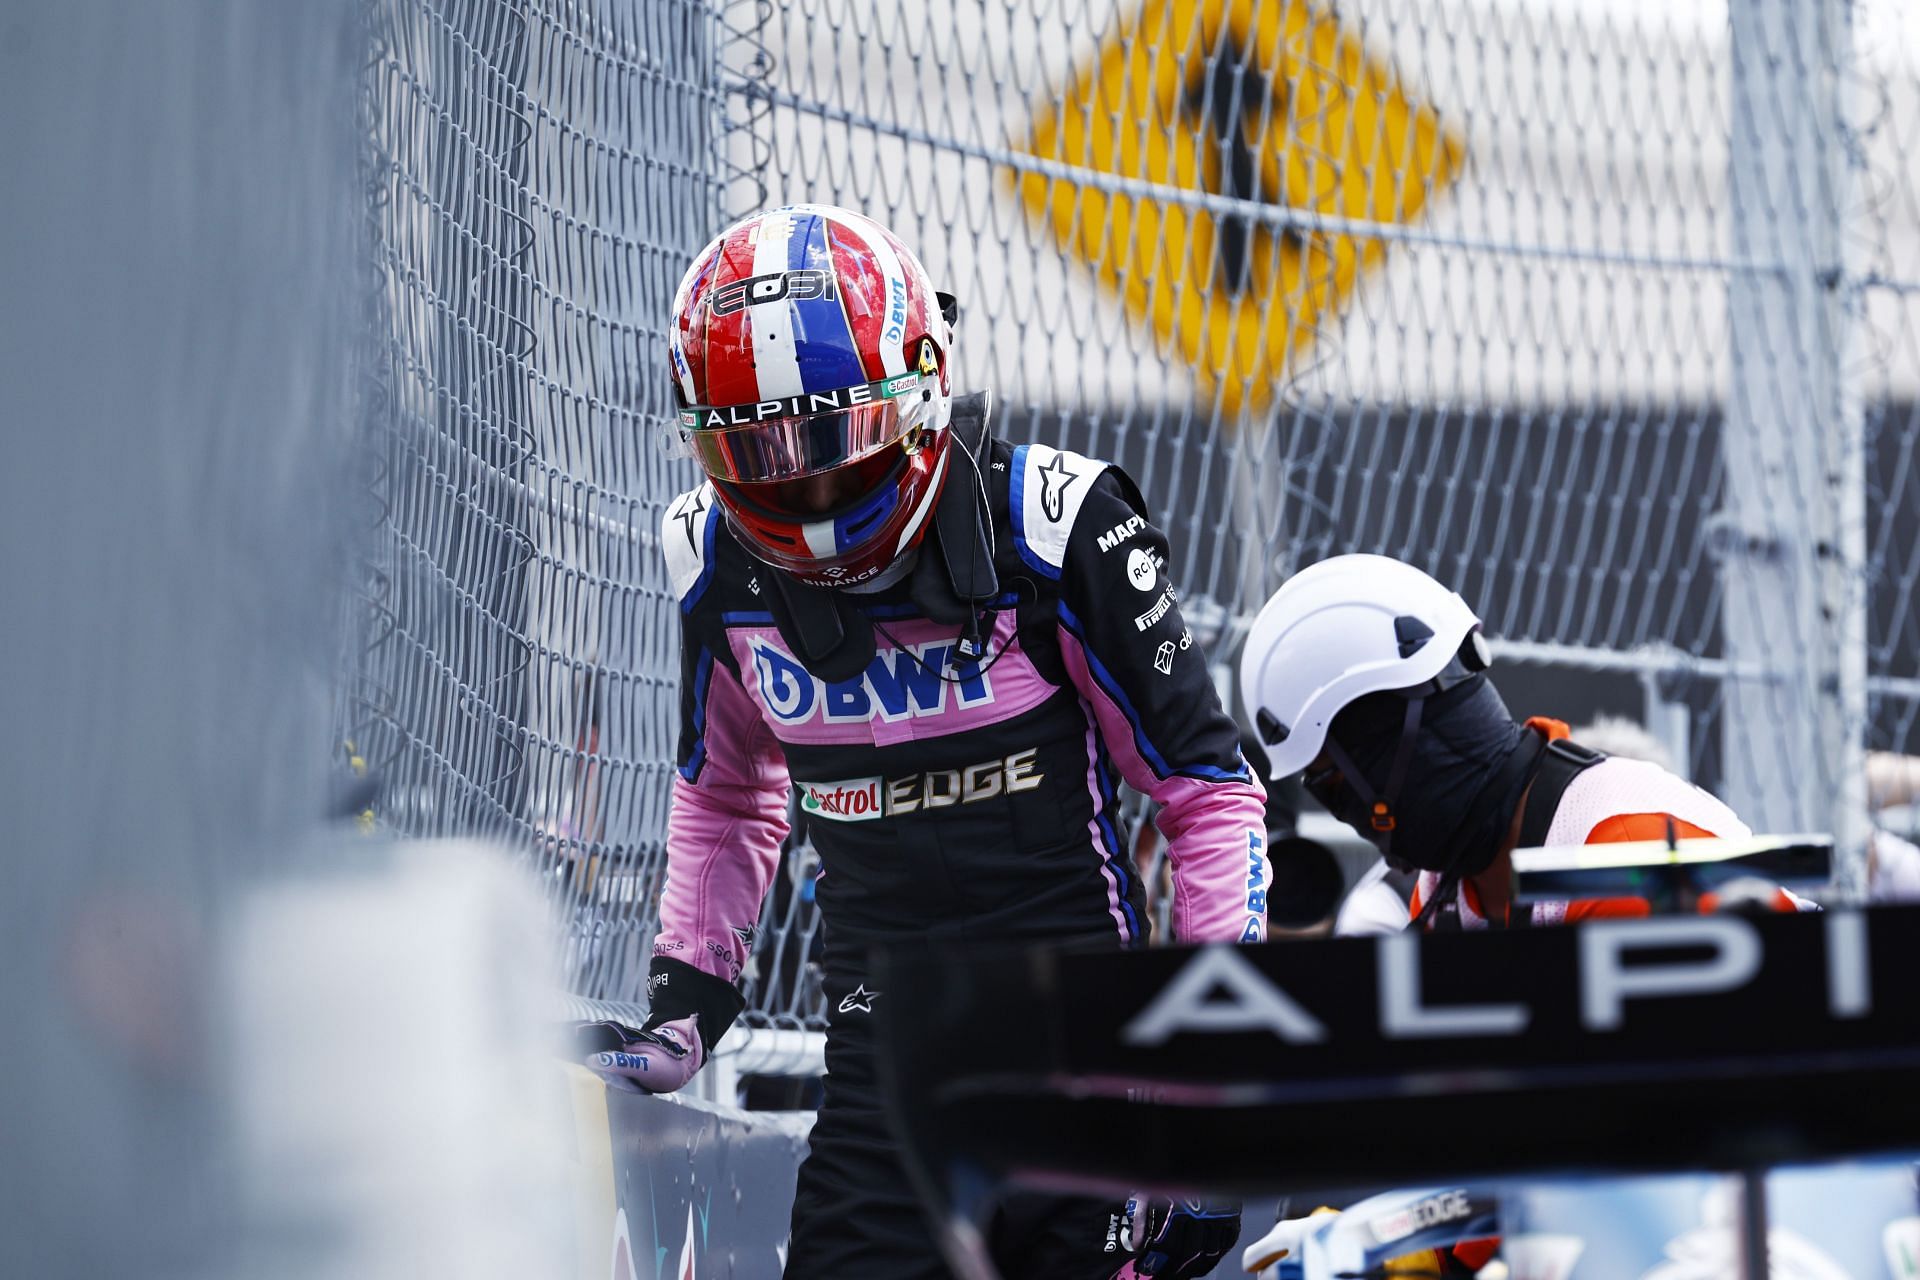 F1 Grand Prix of Miami - Final Practice - Esteban Ocon gets out of his vehicle.